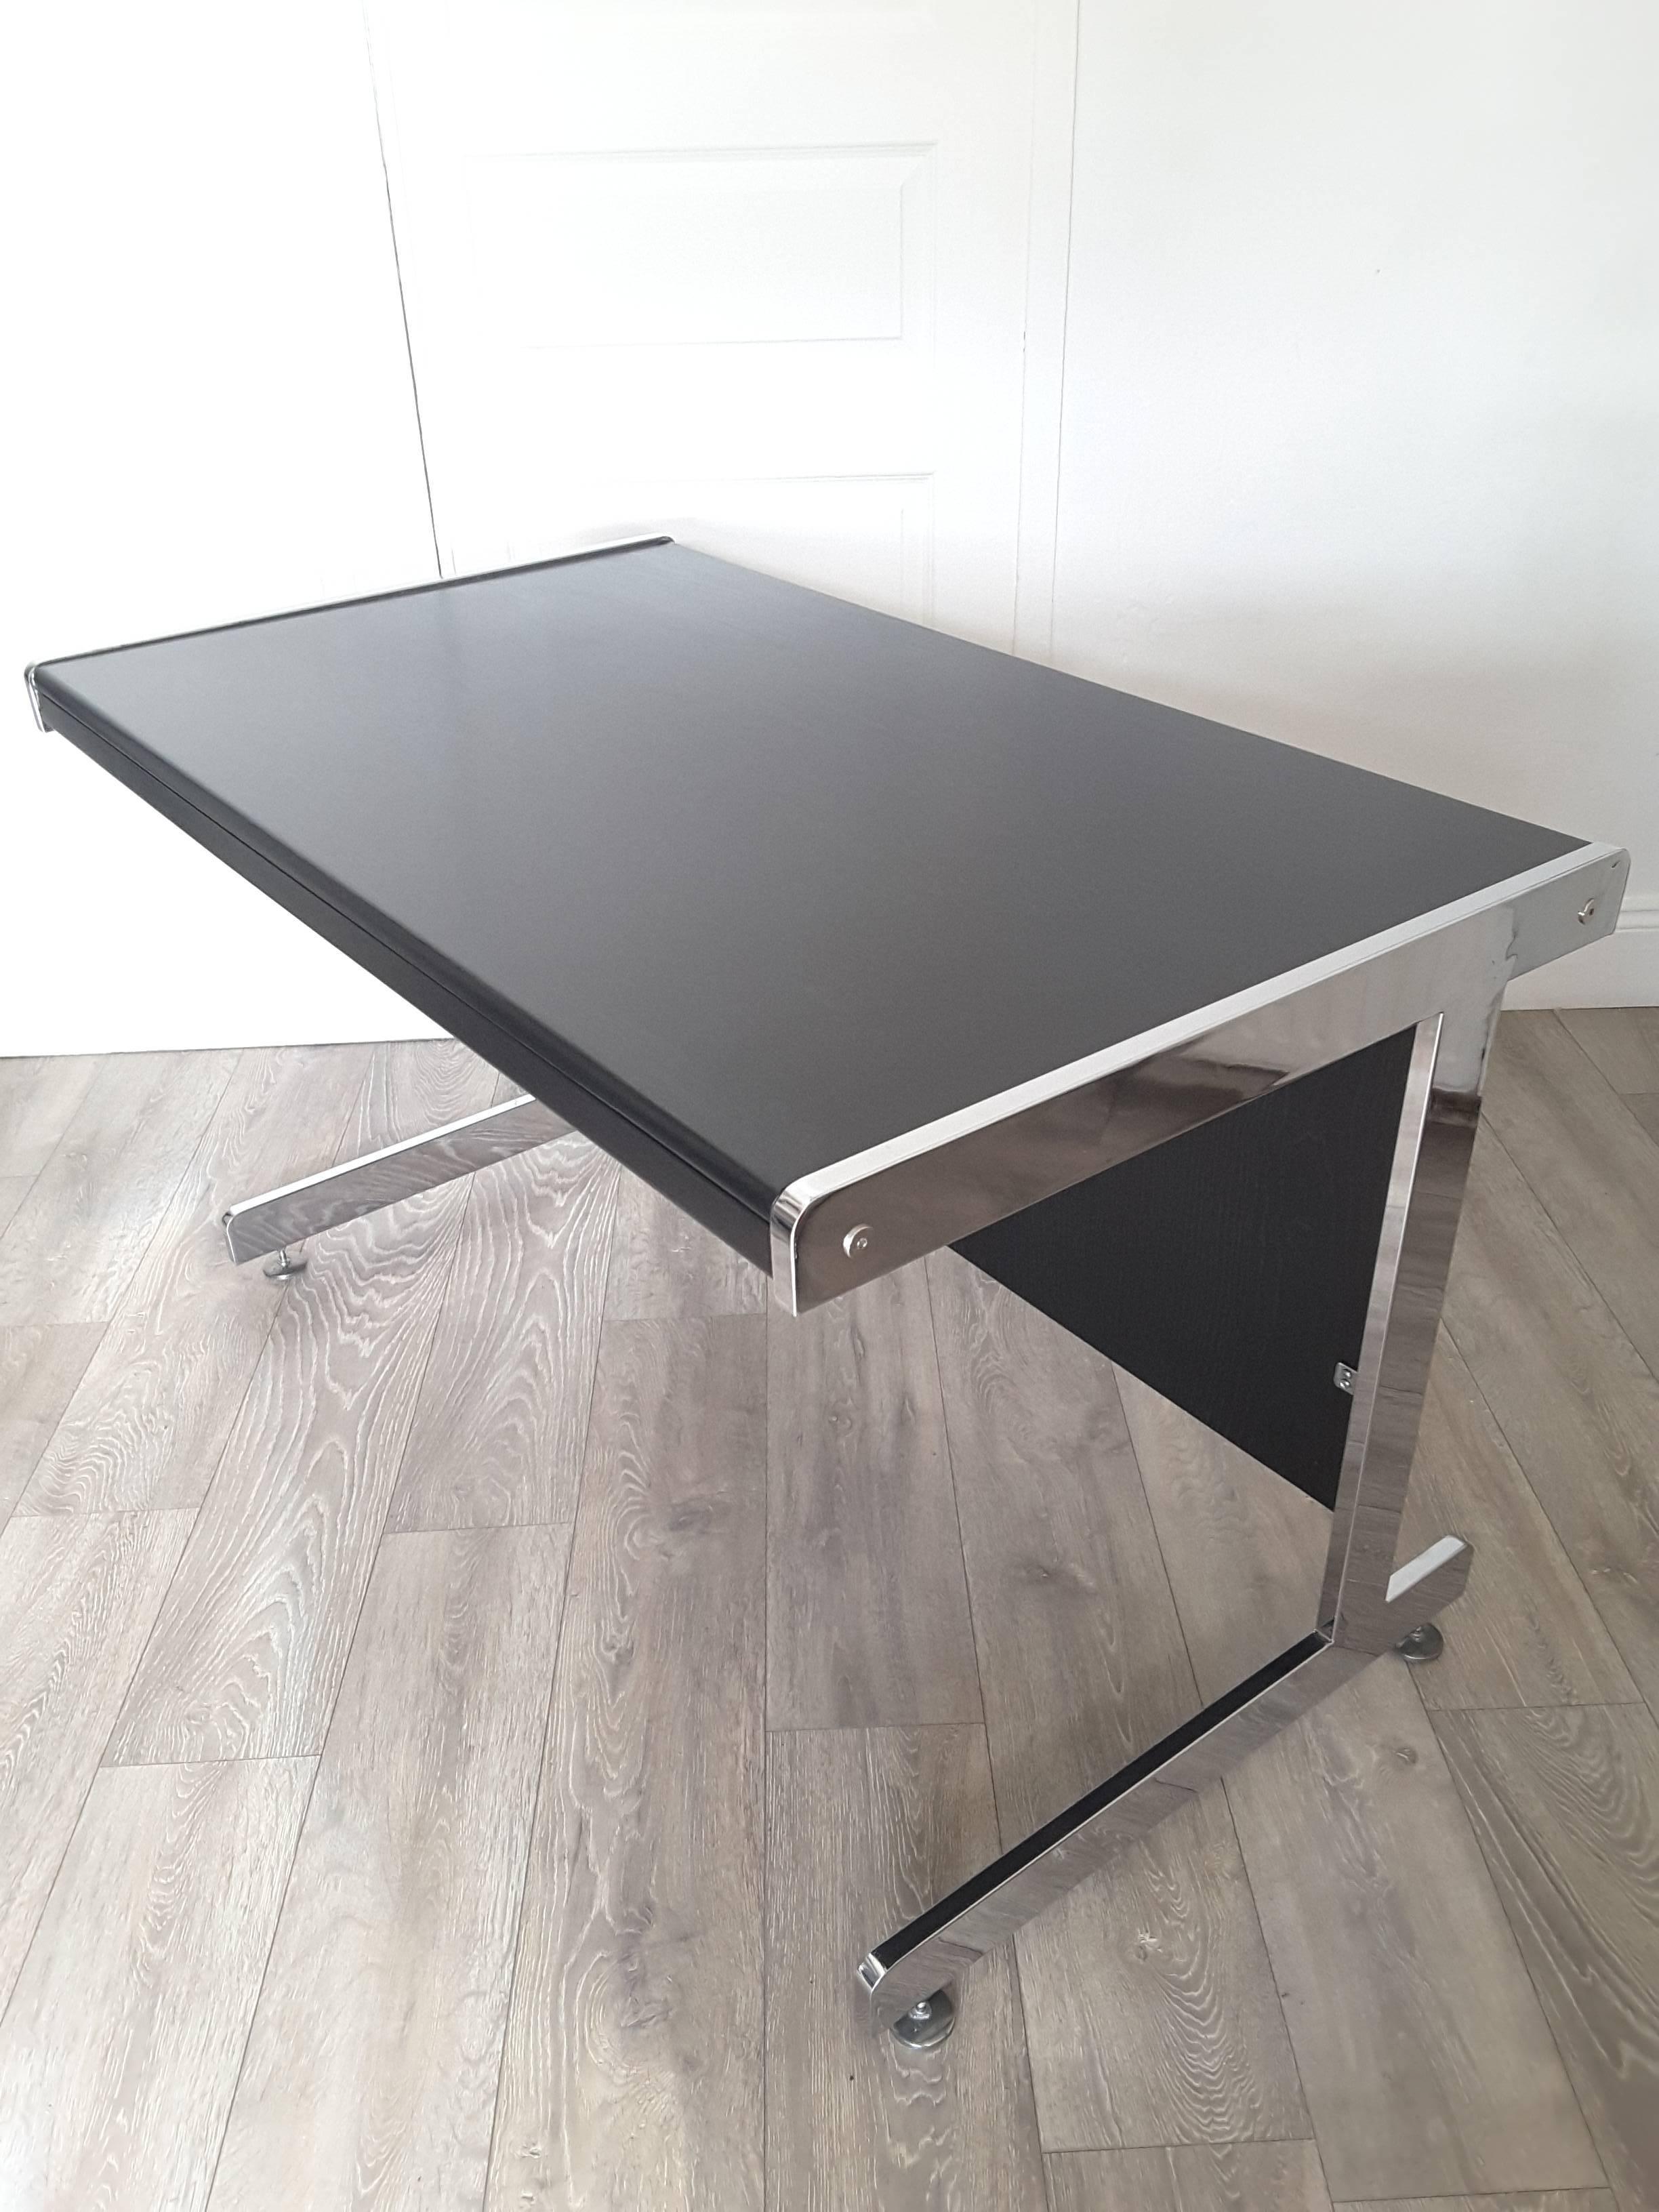 Mid-Century Modern Italian desk. Chrome supports with ebonized wood top and back panel. Adjustable pad feet. Dismantles for shipping.